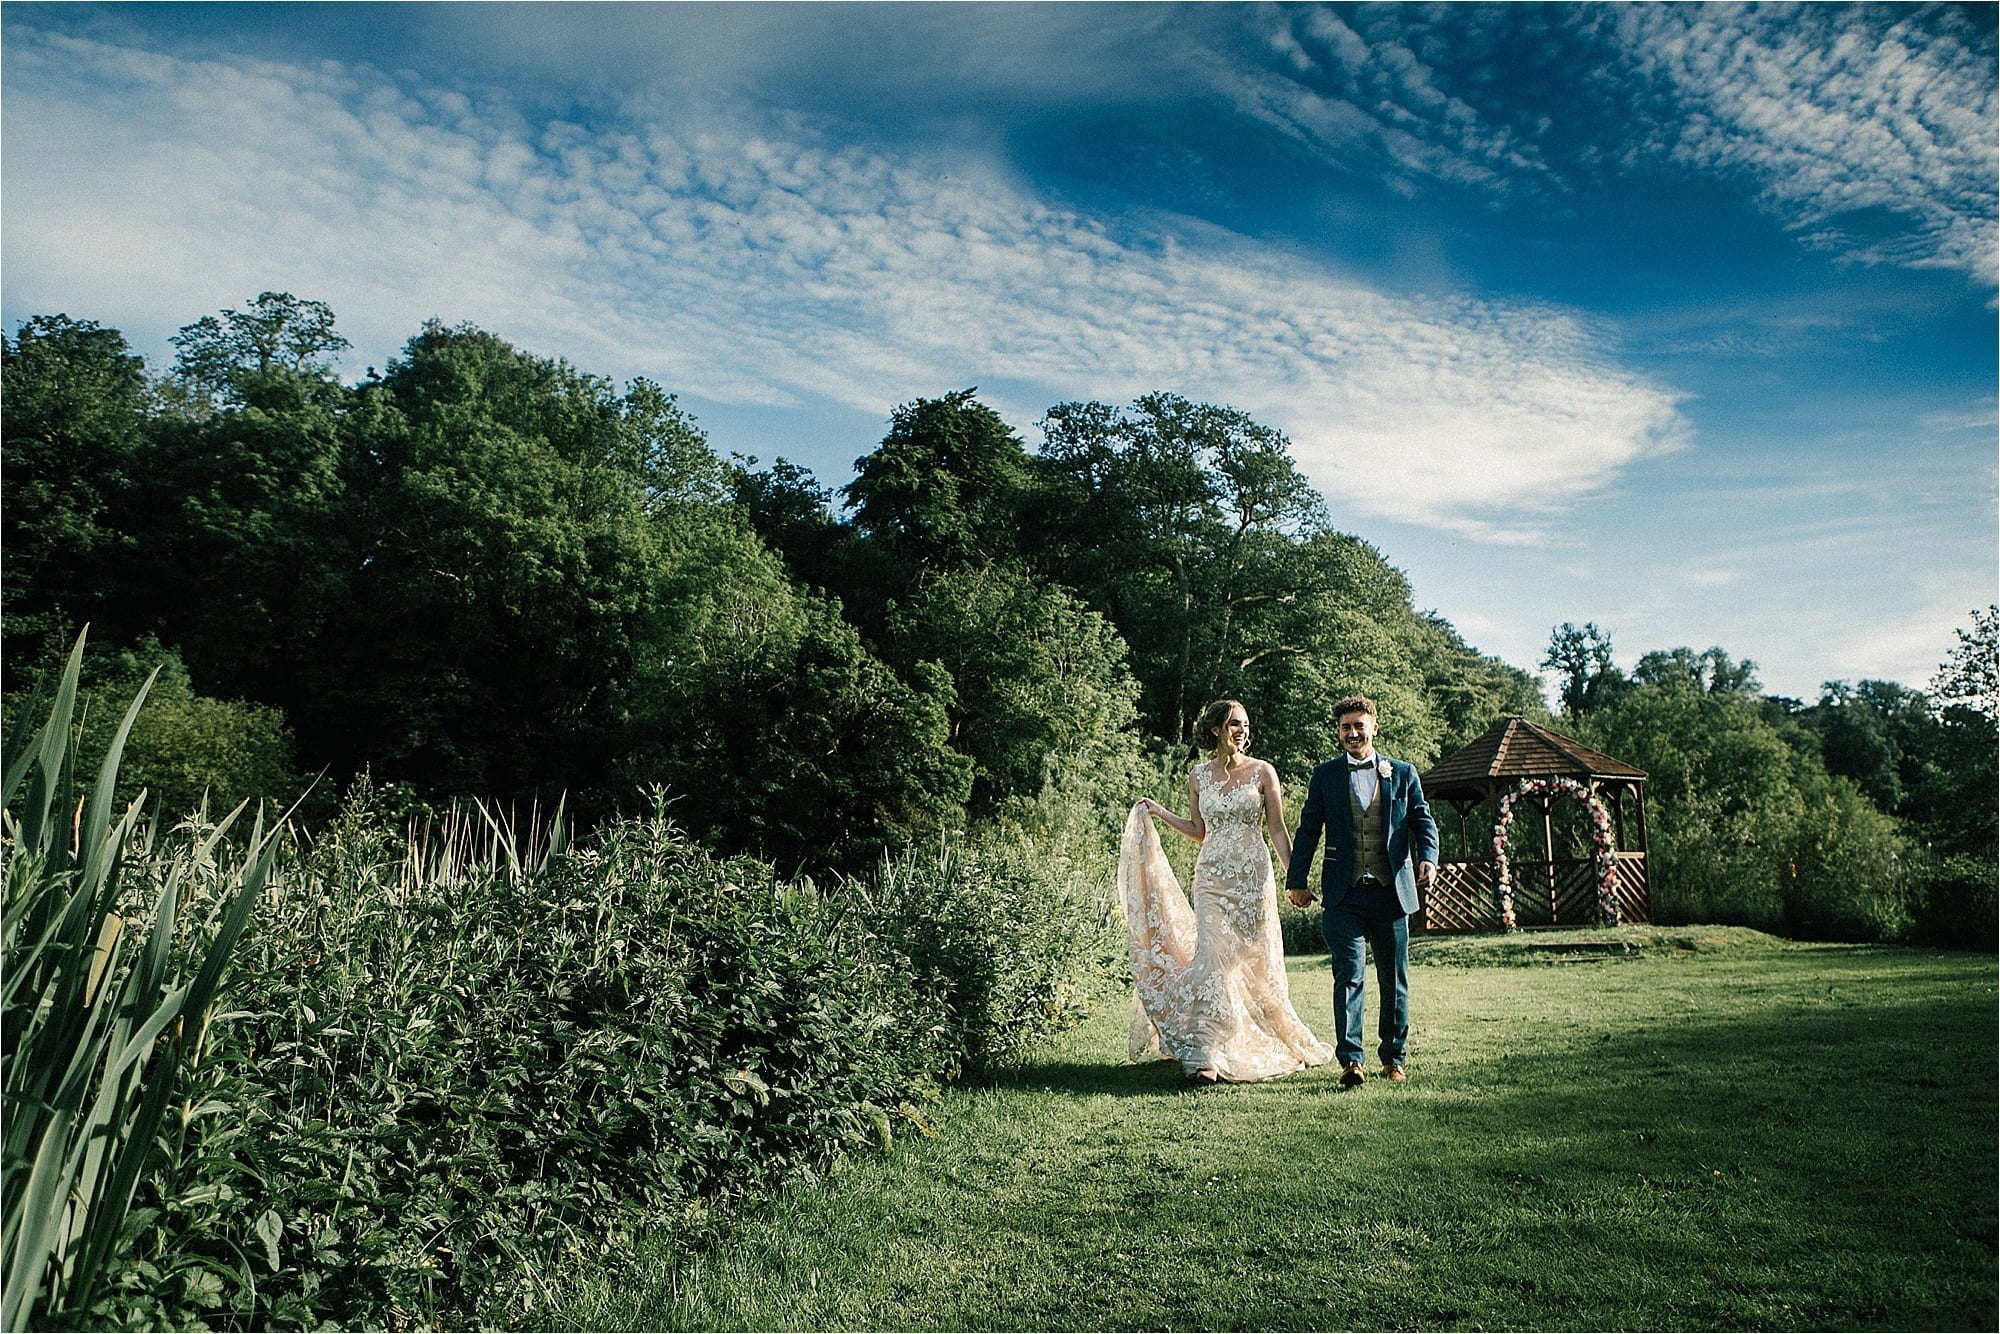 Outdoor Country wedding at Kitley